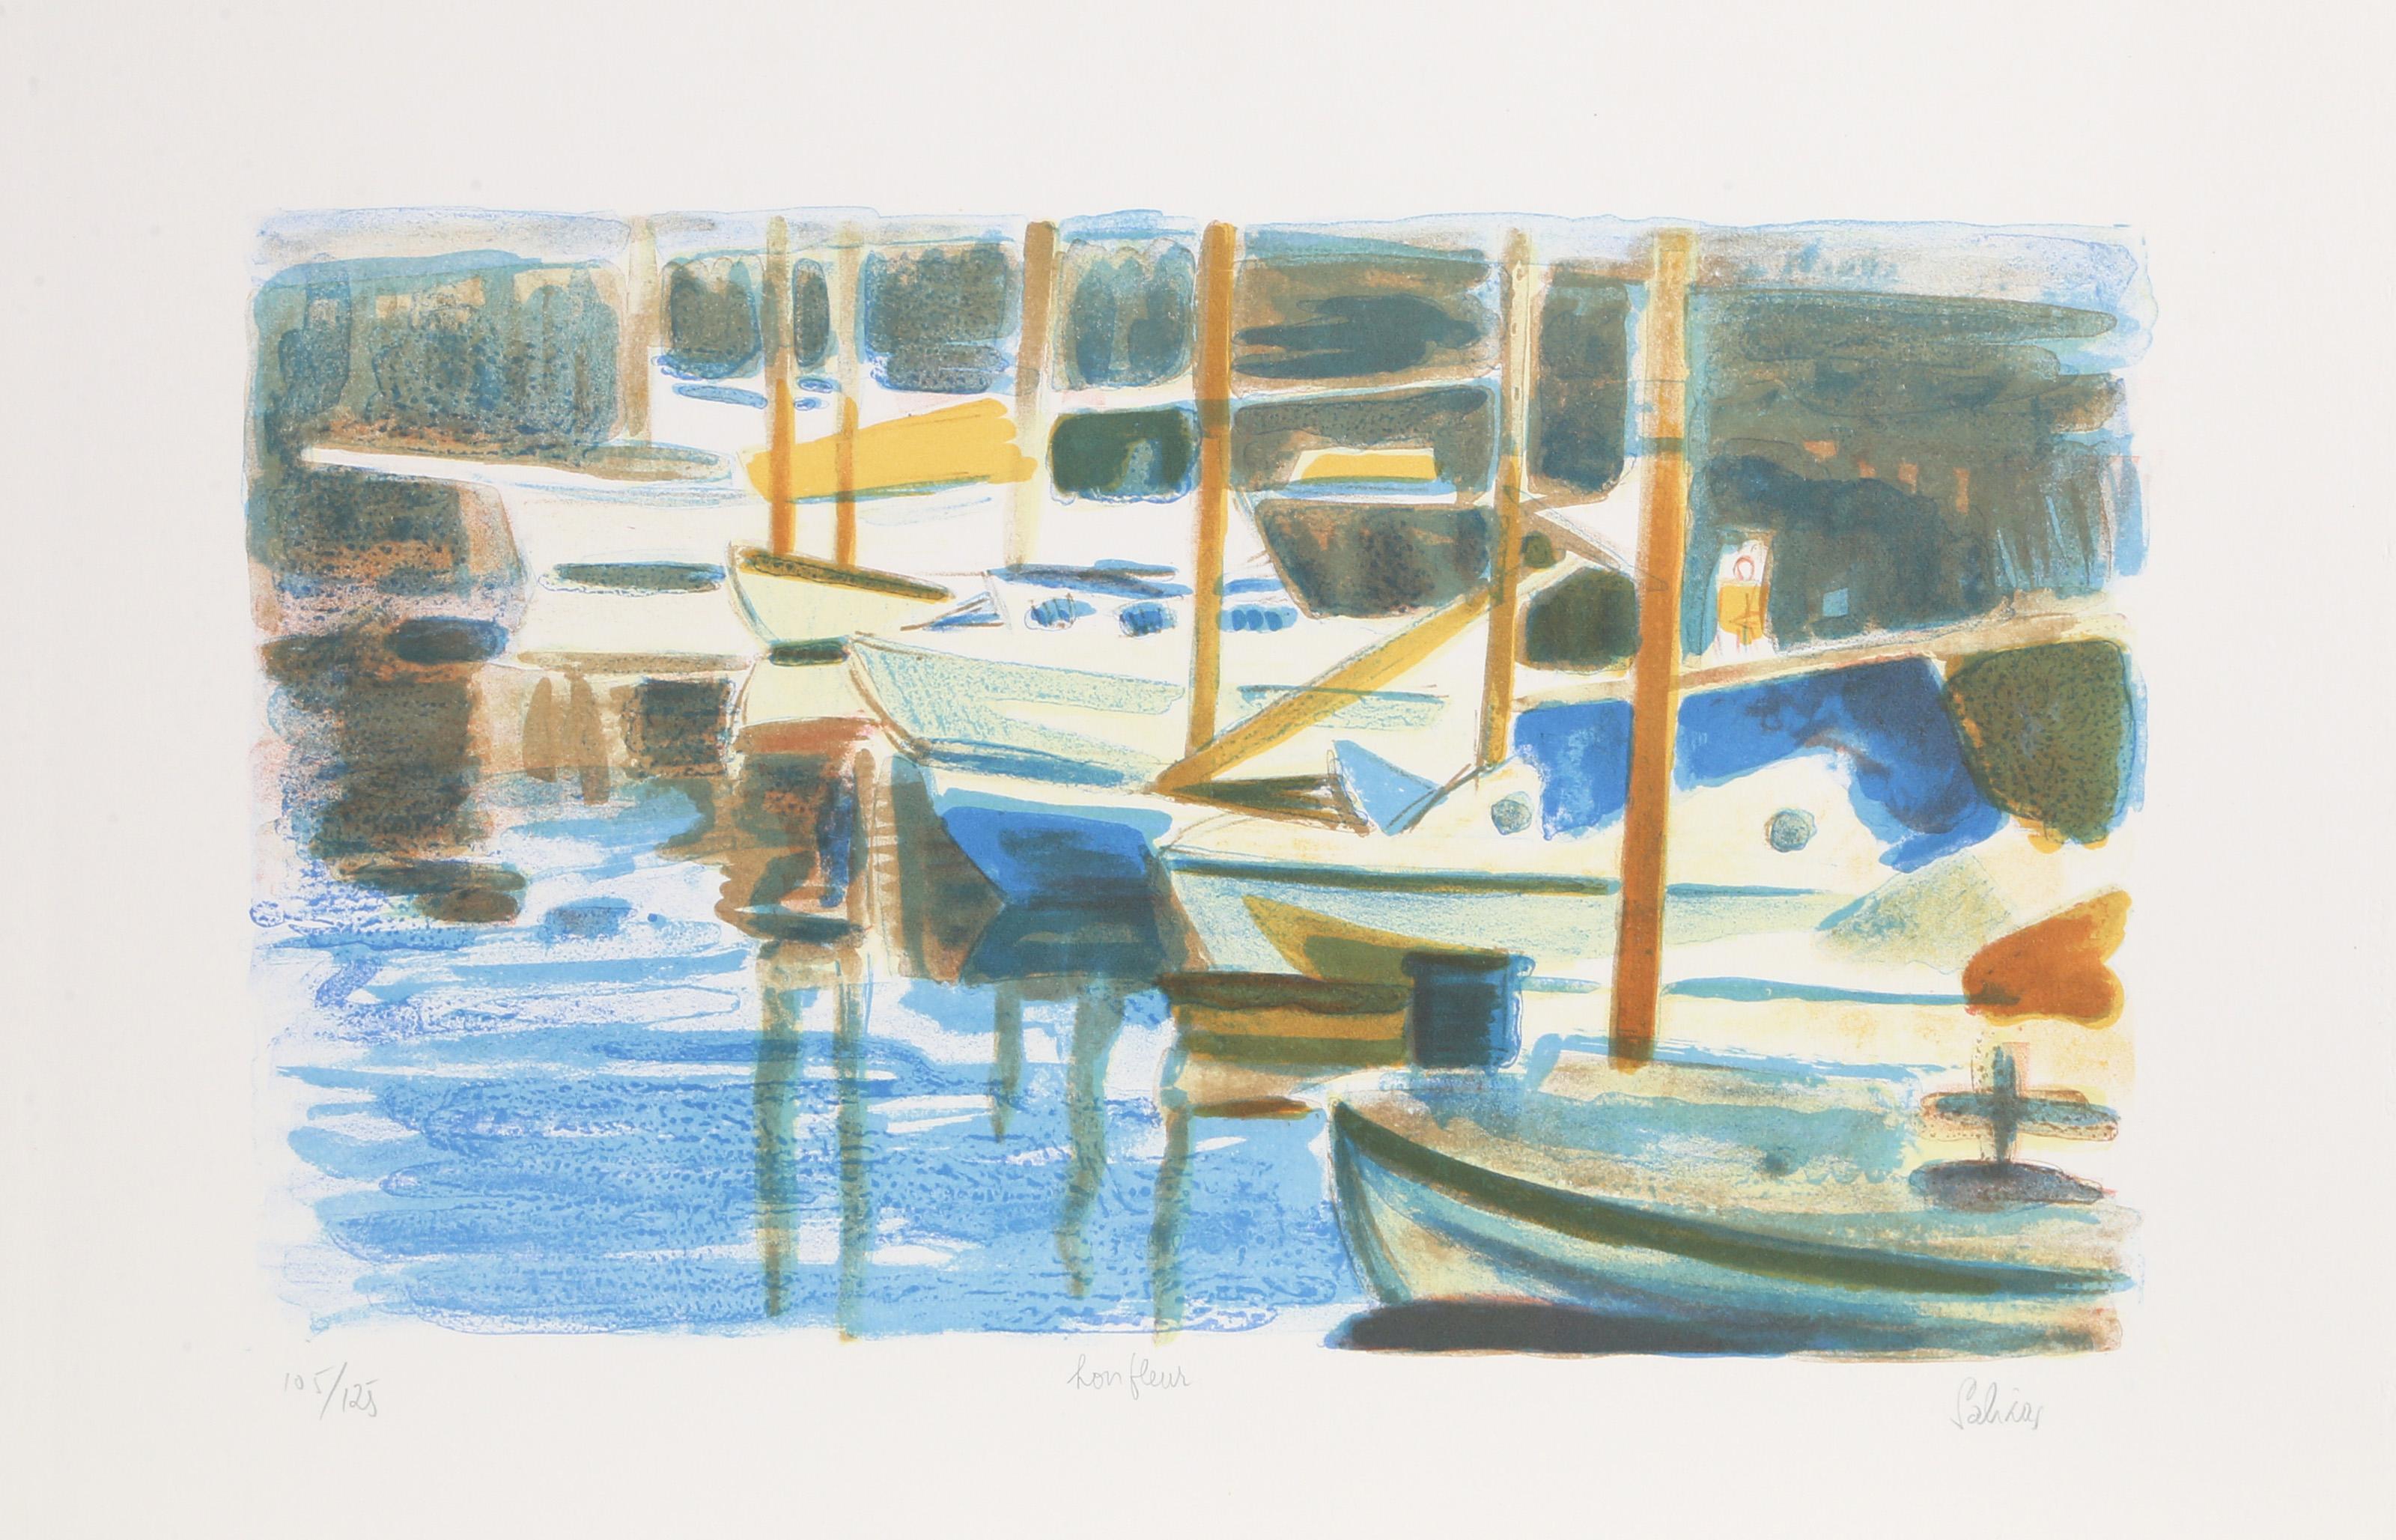 Laurent Marcel Salinas, Egyptian/French (1913 - 2010) -  Harbor Study 1. Year: circa 1950, Medium: Lithograph, signed and numbered in pencil, Edition: EA, Image Size: 13.5 x 19 inches, Size: 19 x 25 in. 